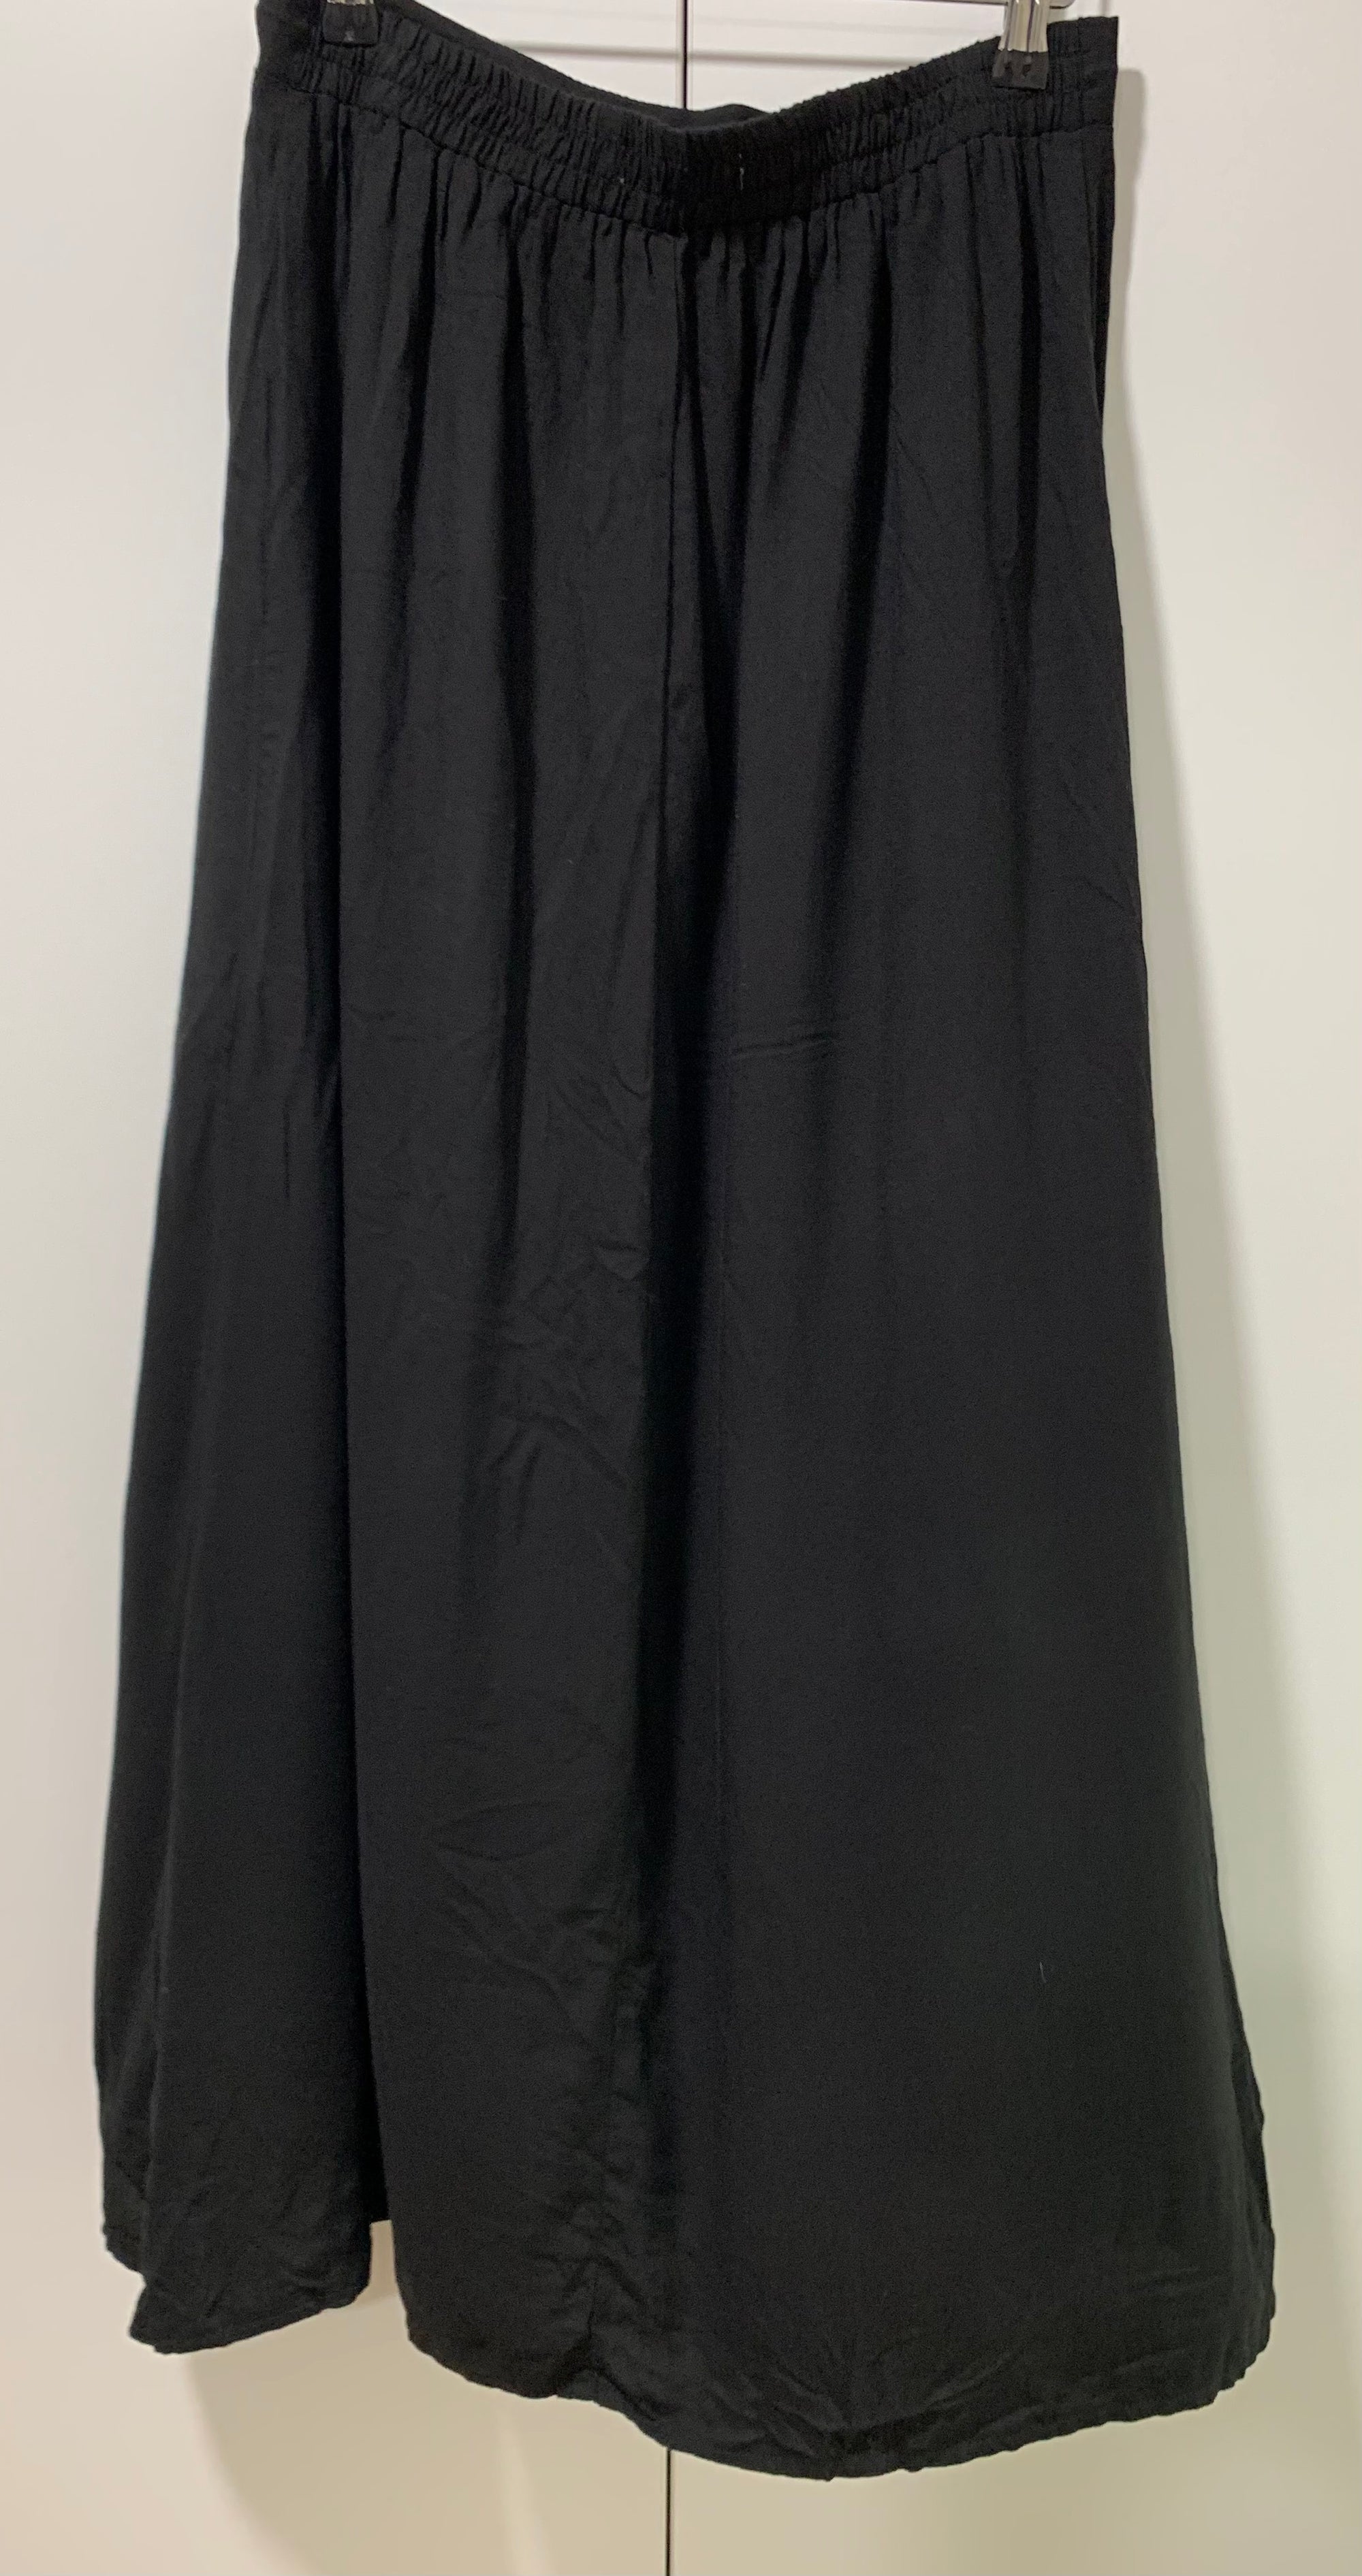 A-Line Skirt in Black with Drawstring Waist Ankle Length & Flattering Fall